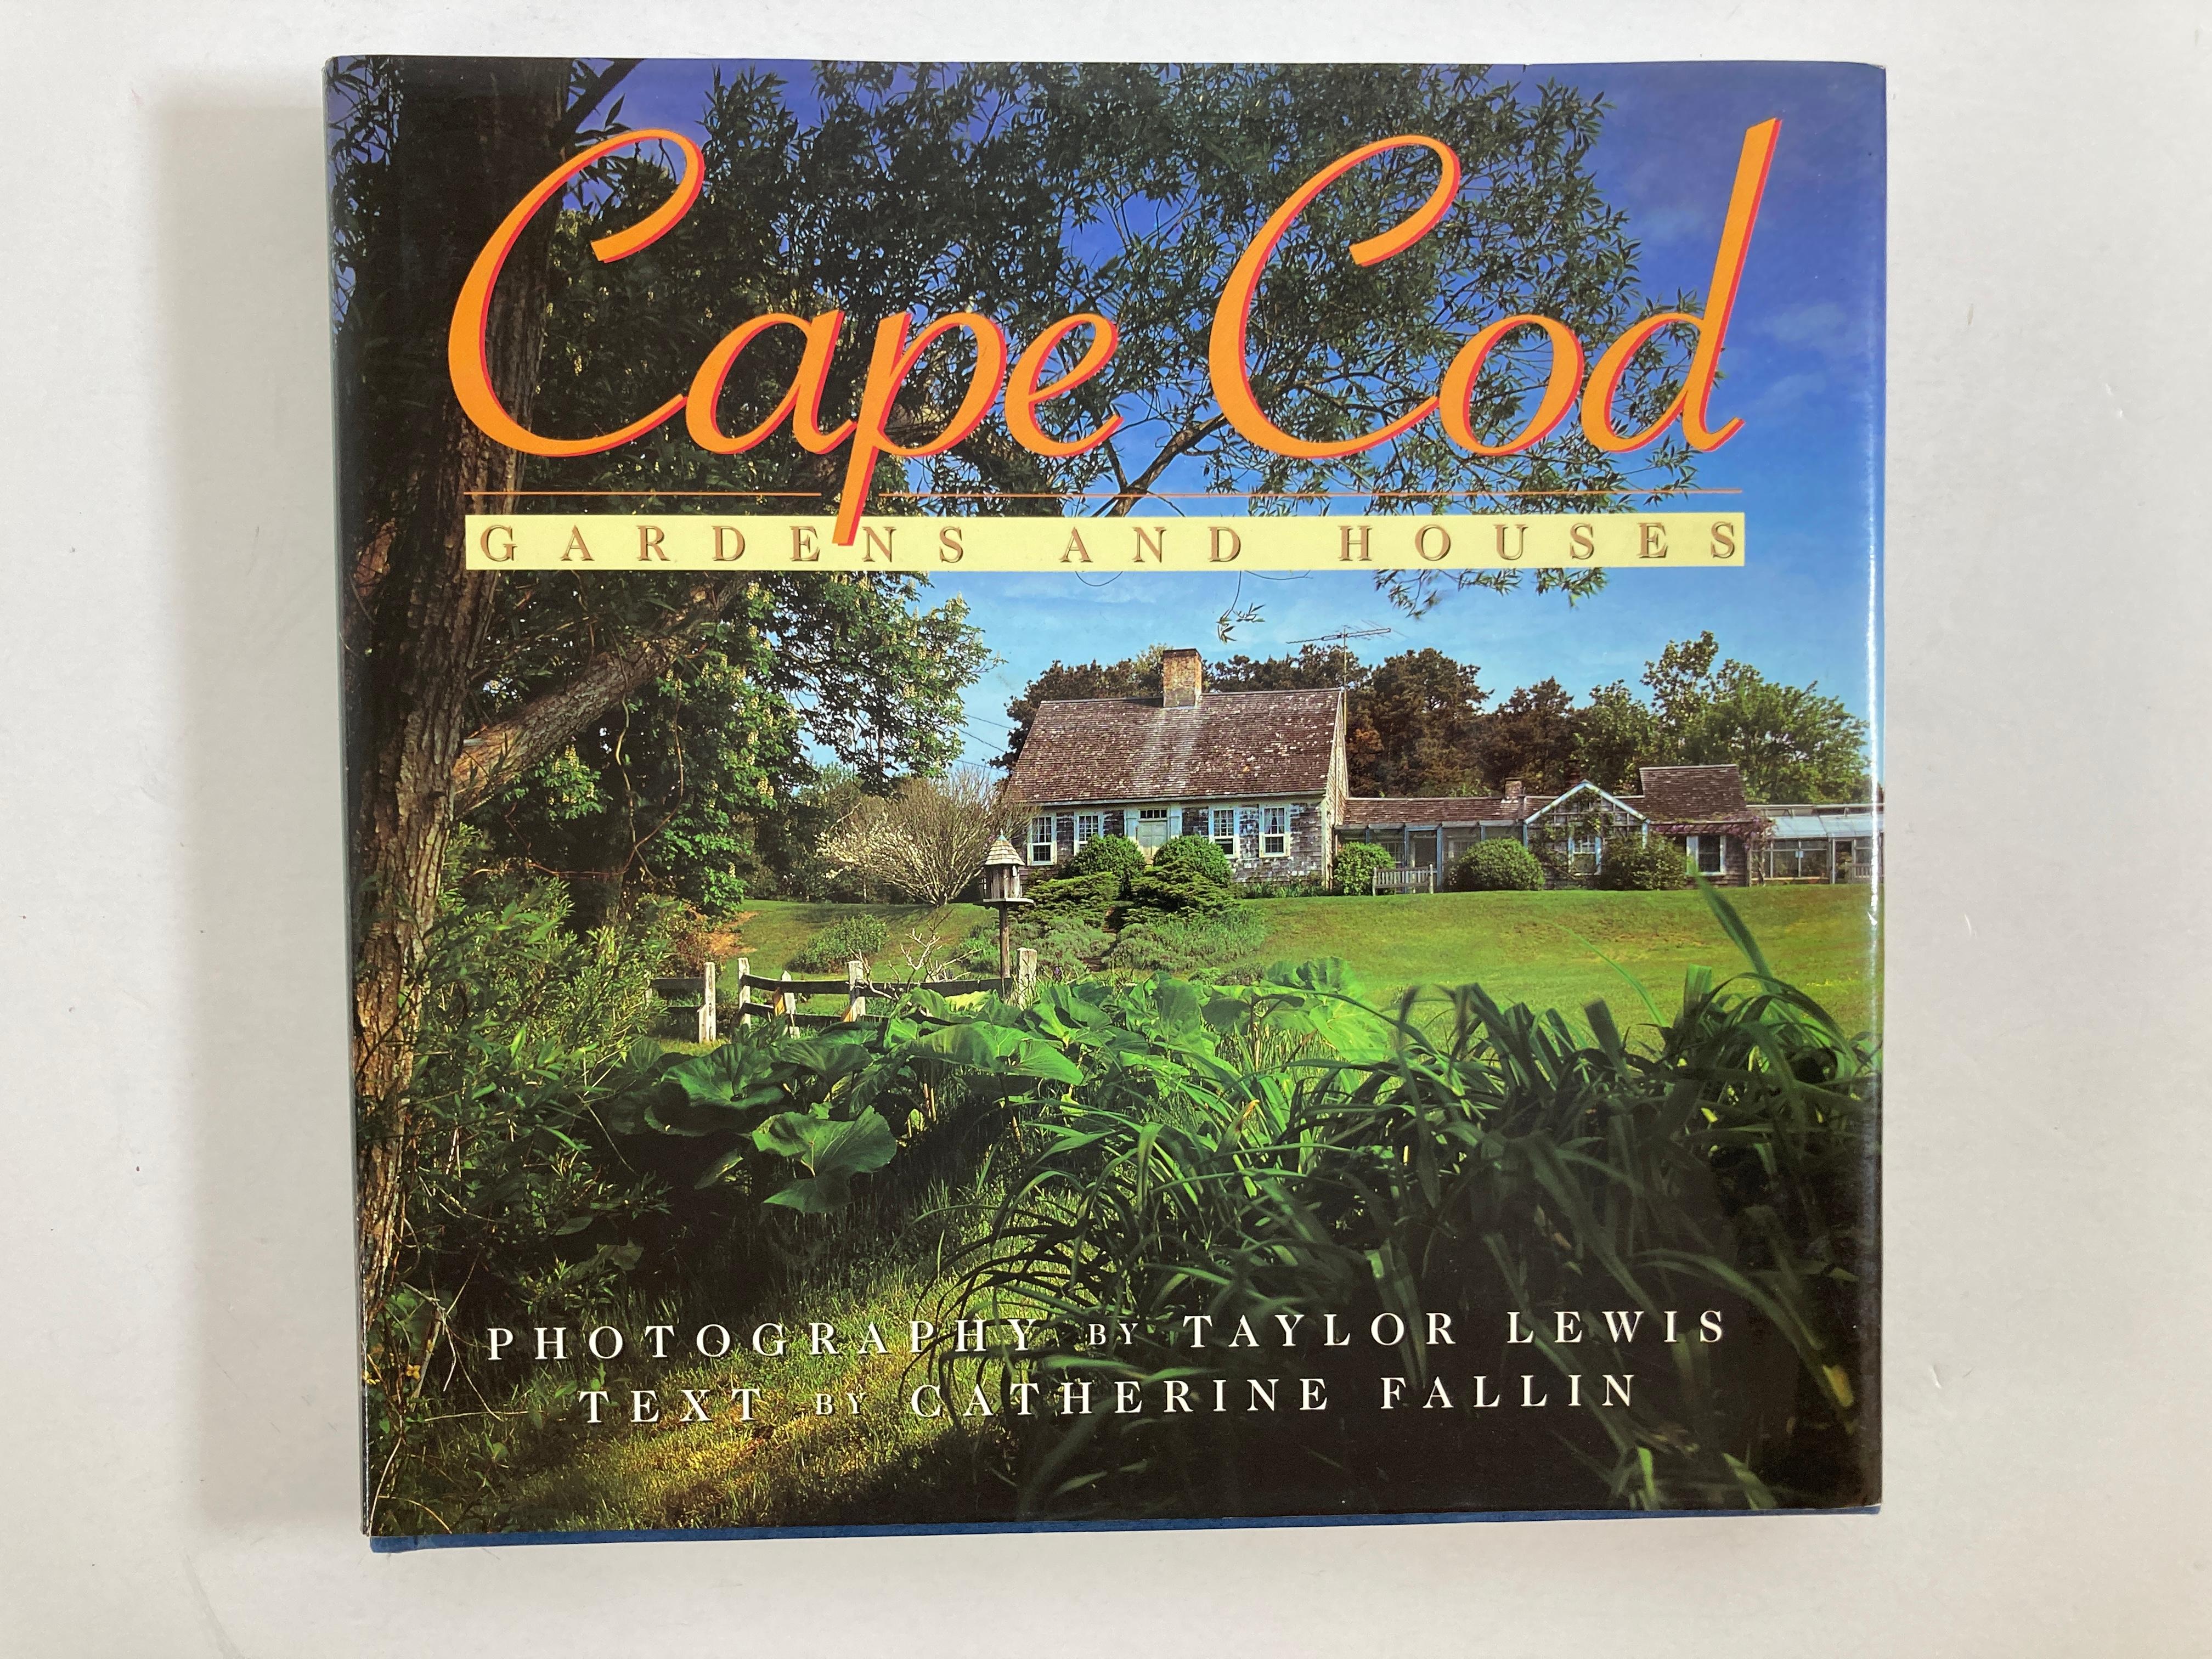 Cape Cod Gardens and Houses by Catherine Fallin Taylor Lewis hardcover book
A revealing tour of the lush gardens and enchanting homes of New England's Cape Cod, in more than 400 lavish color photographs and inviting text. Well known for its